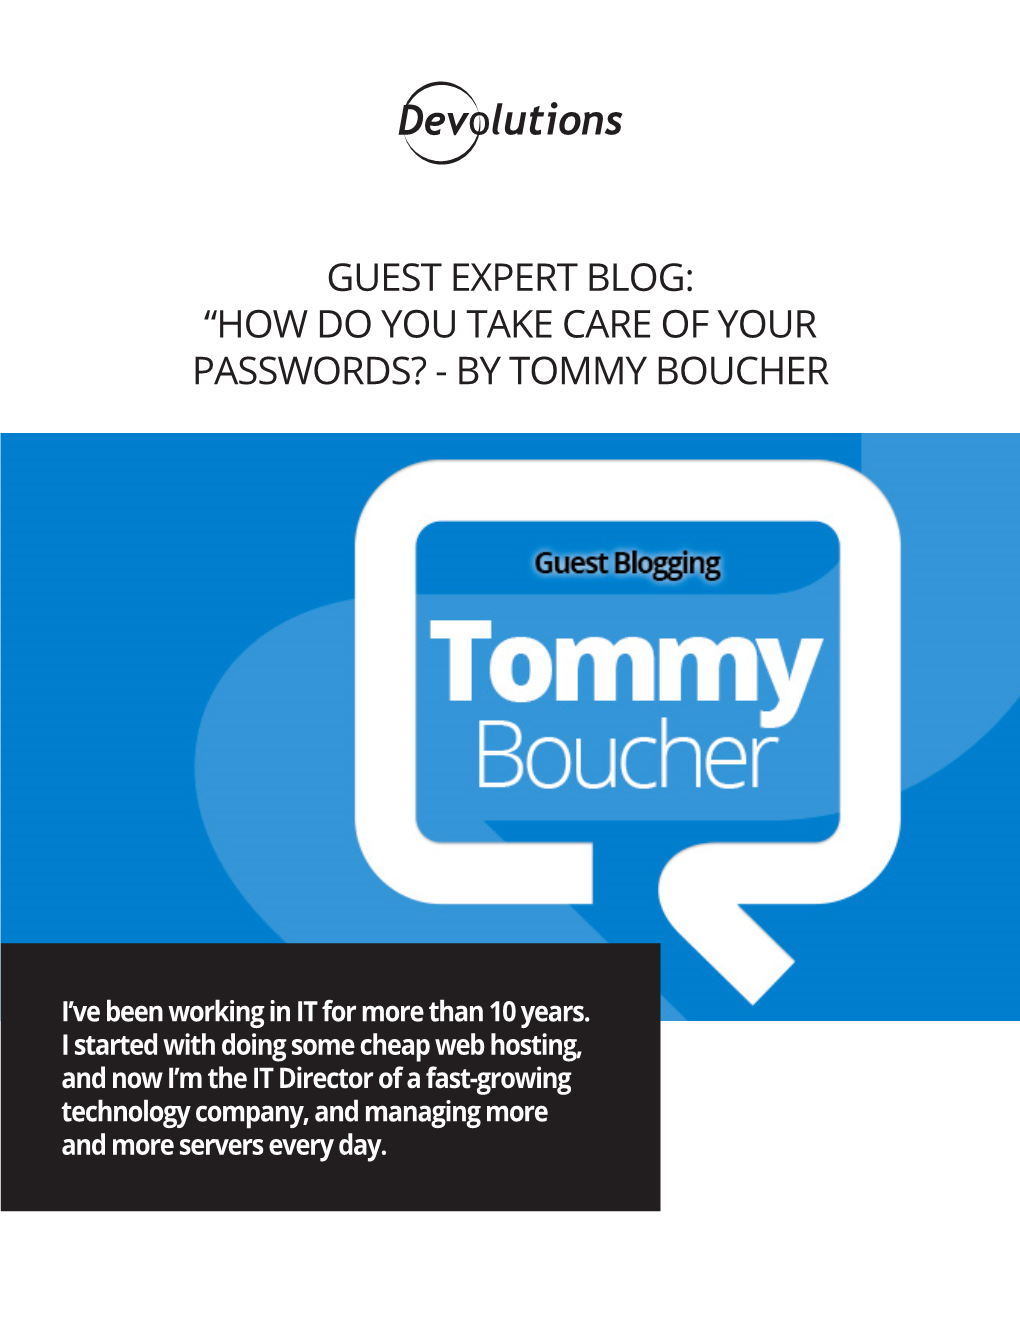 Guest Expert Blog: “How Do You Take Care of Your Passwords? - by Tommy Boucher